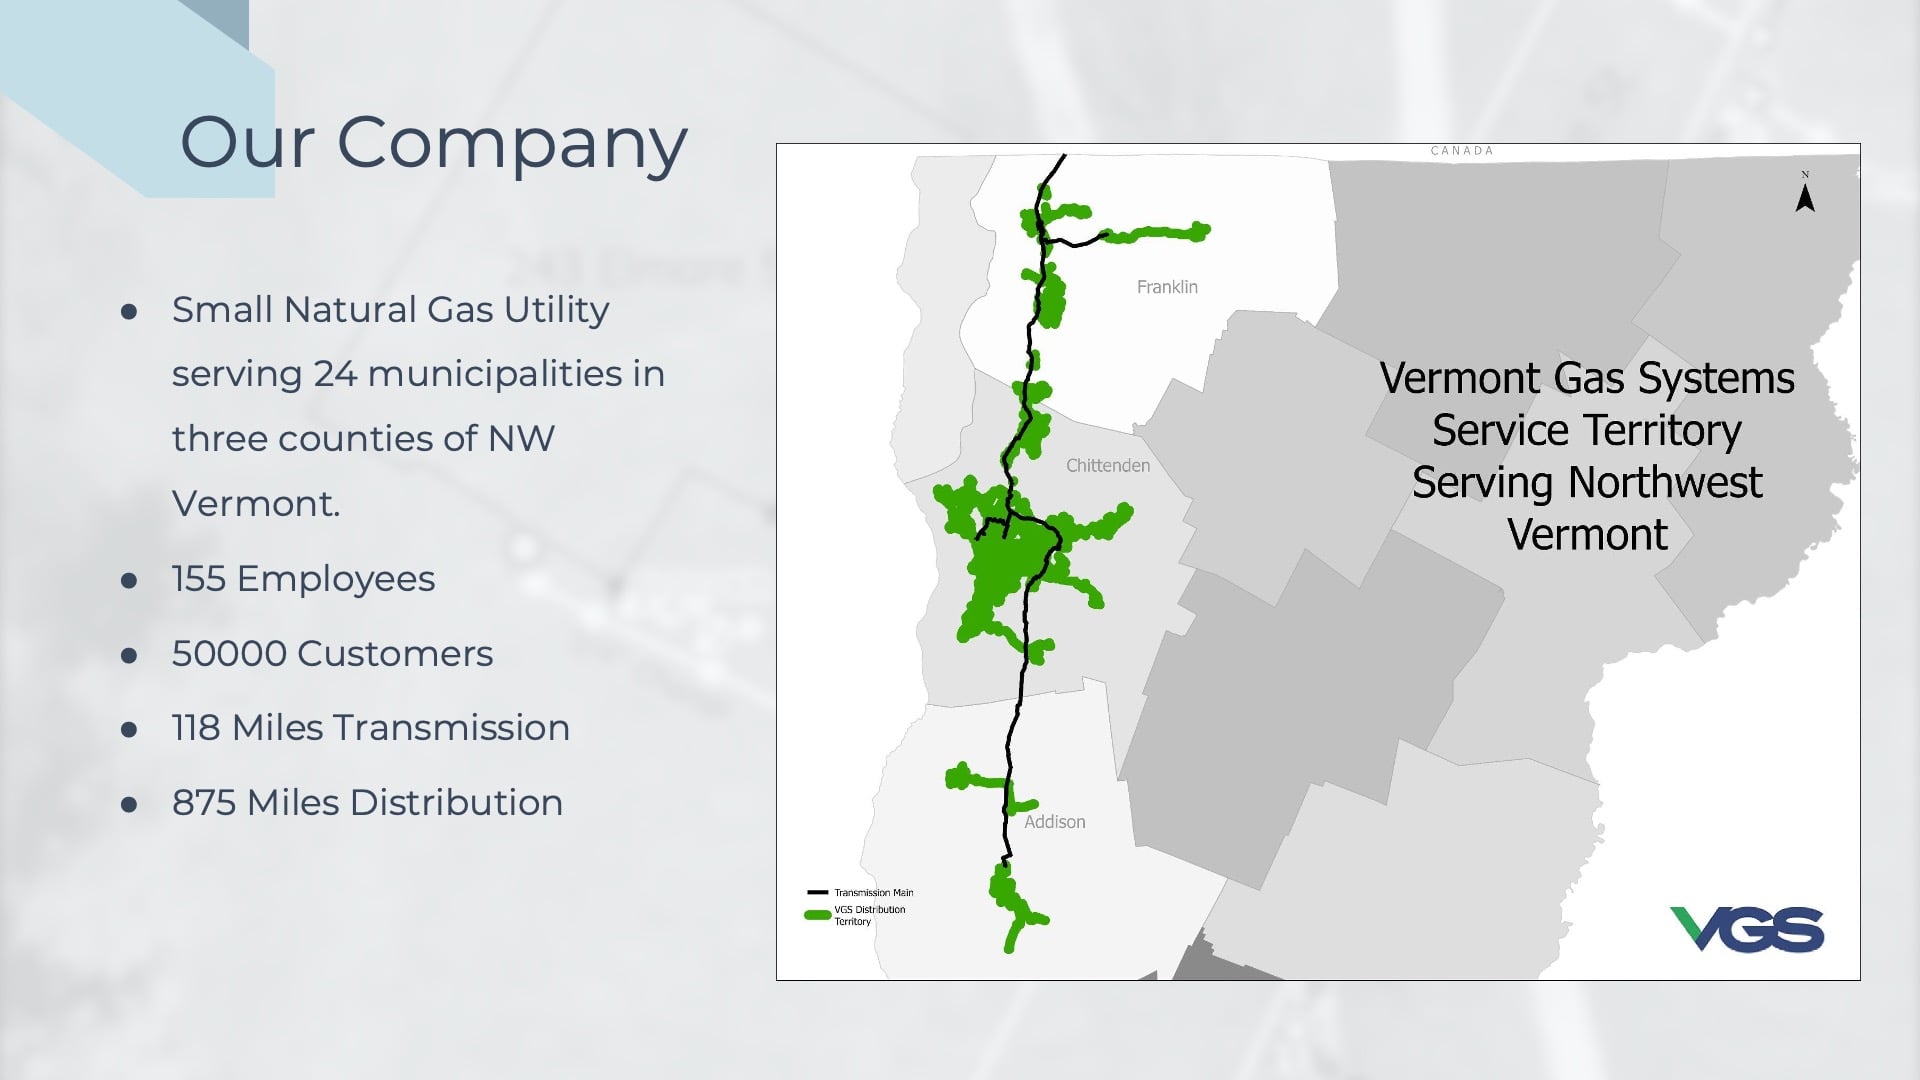 Slide 1 of James Cunningham's High-Accuracy As-Builting for Gas Utilities Presentation shows a map of Vermont Gas System's Territory alongside bullet points about the company